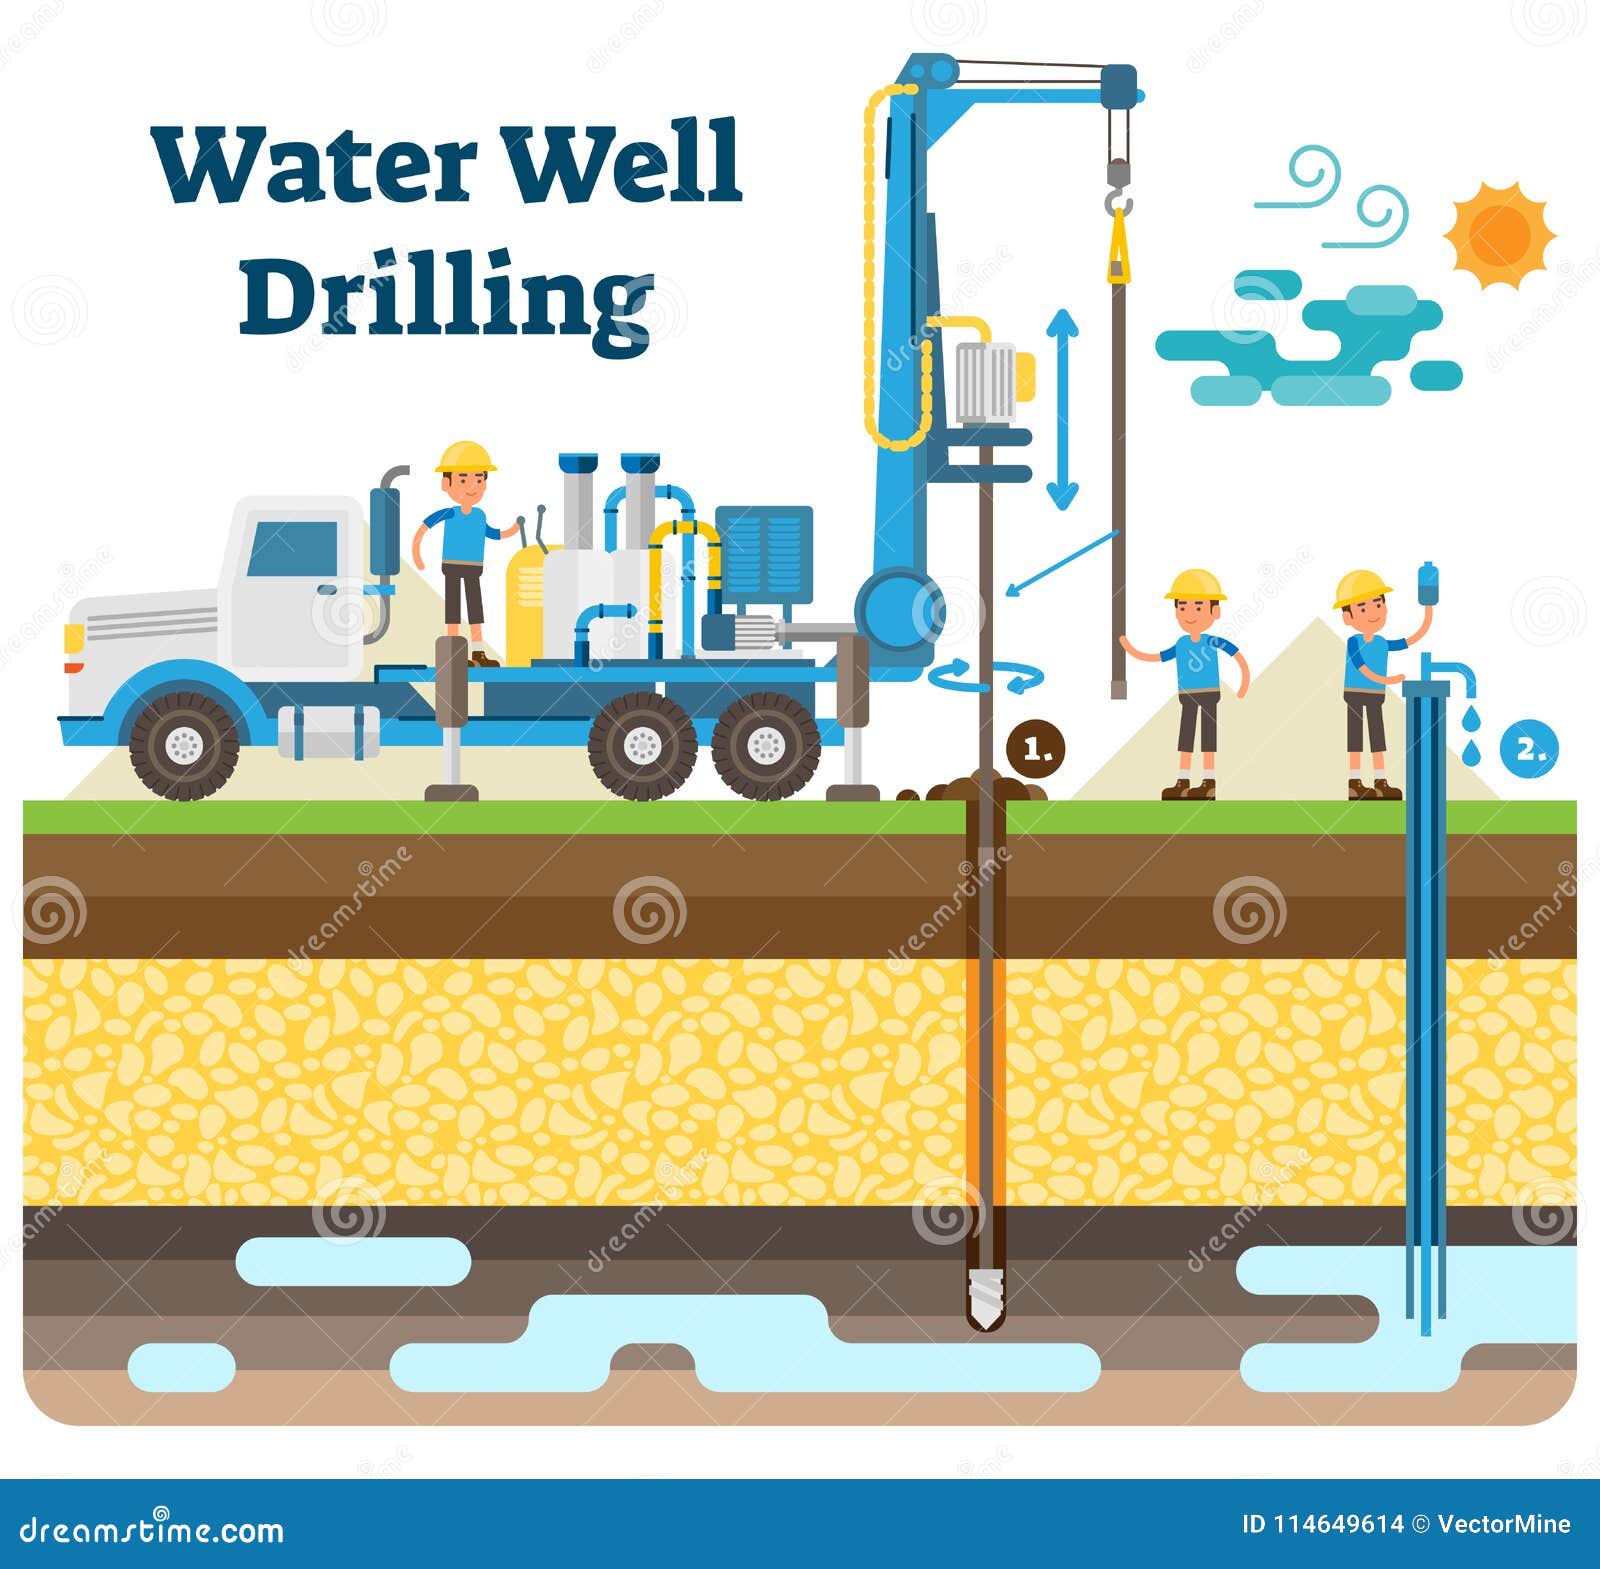 water well drilling   diagram with drilling process, machinery equipment and workers.